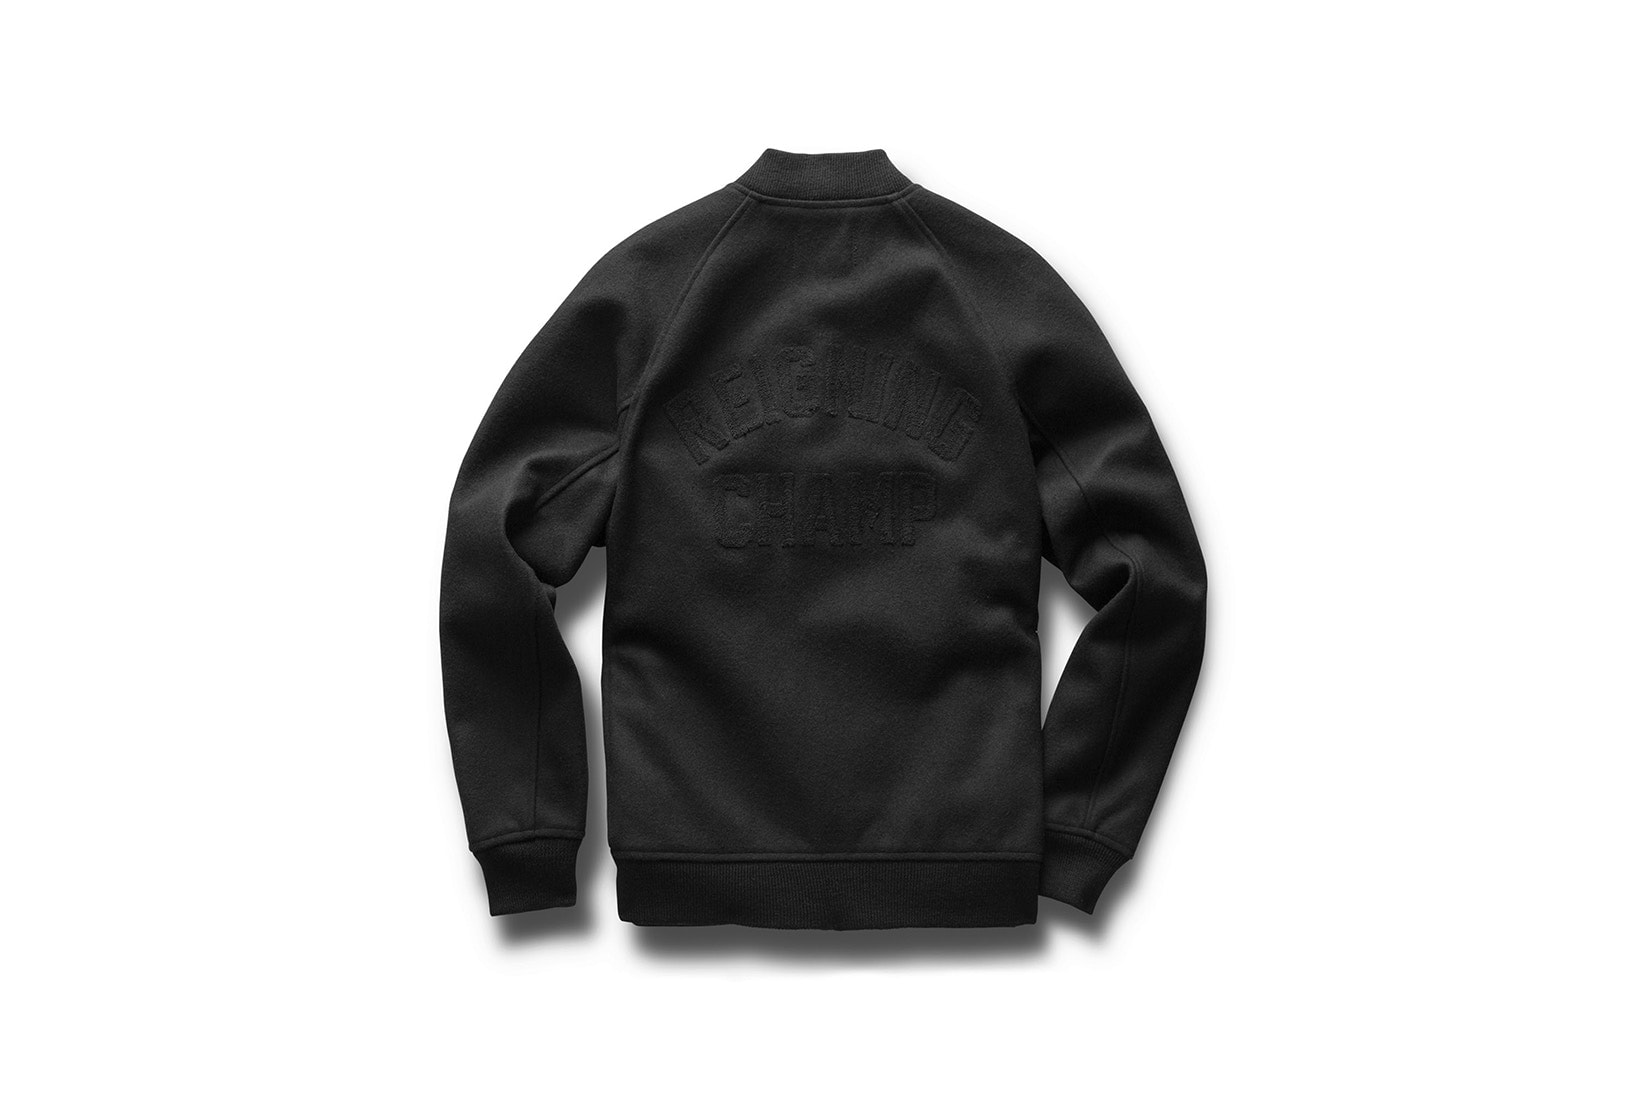 Reigning Champ 十周年別注「One Decade. No Compromise」系列